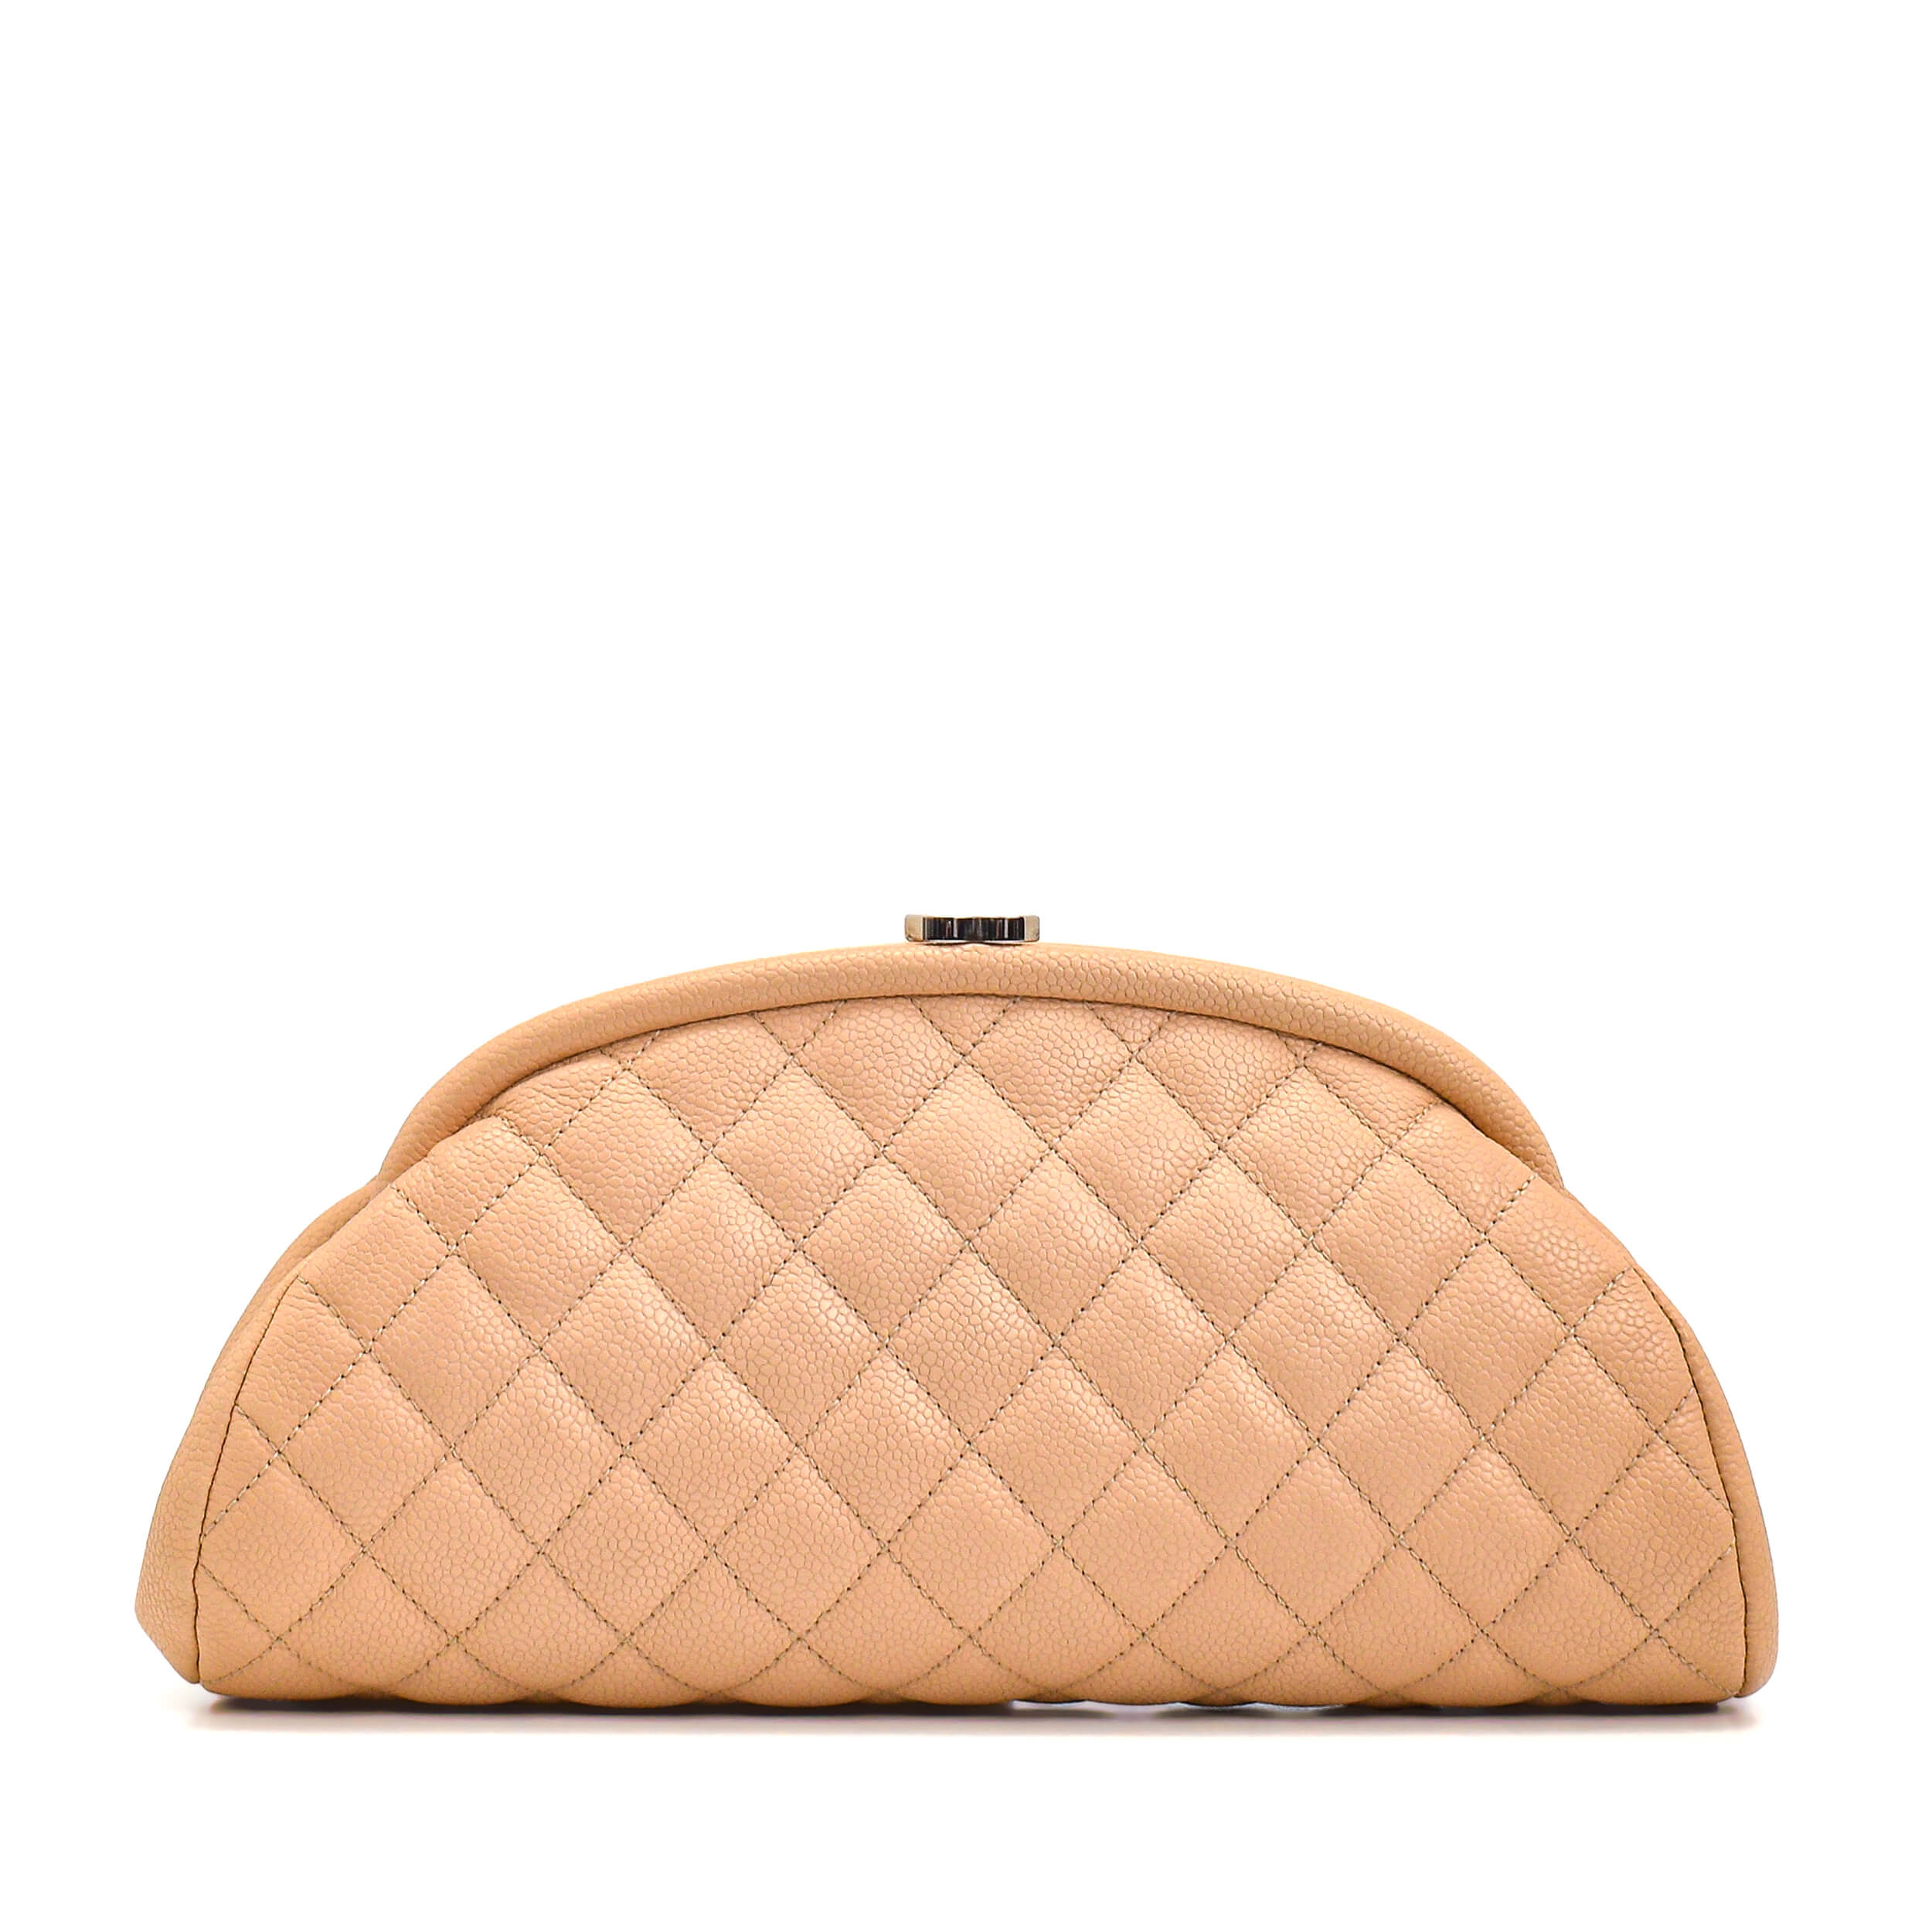 Chanel - Ivory Quilted Calfskin Leather Timeless CC Clutch